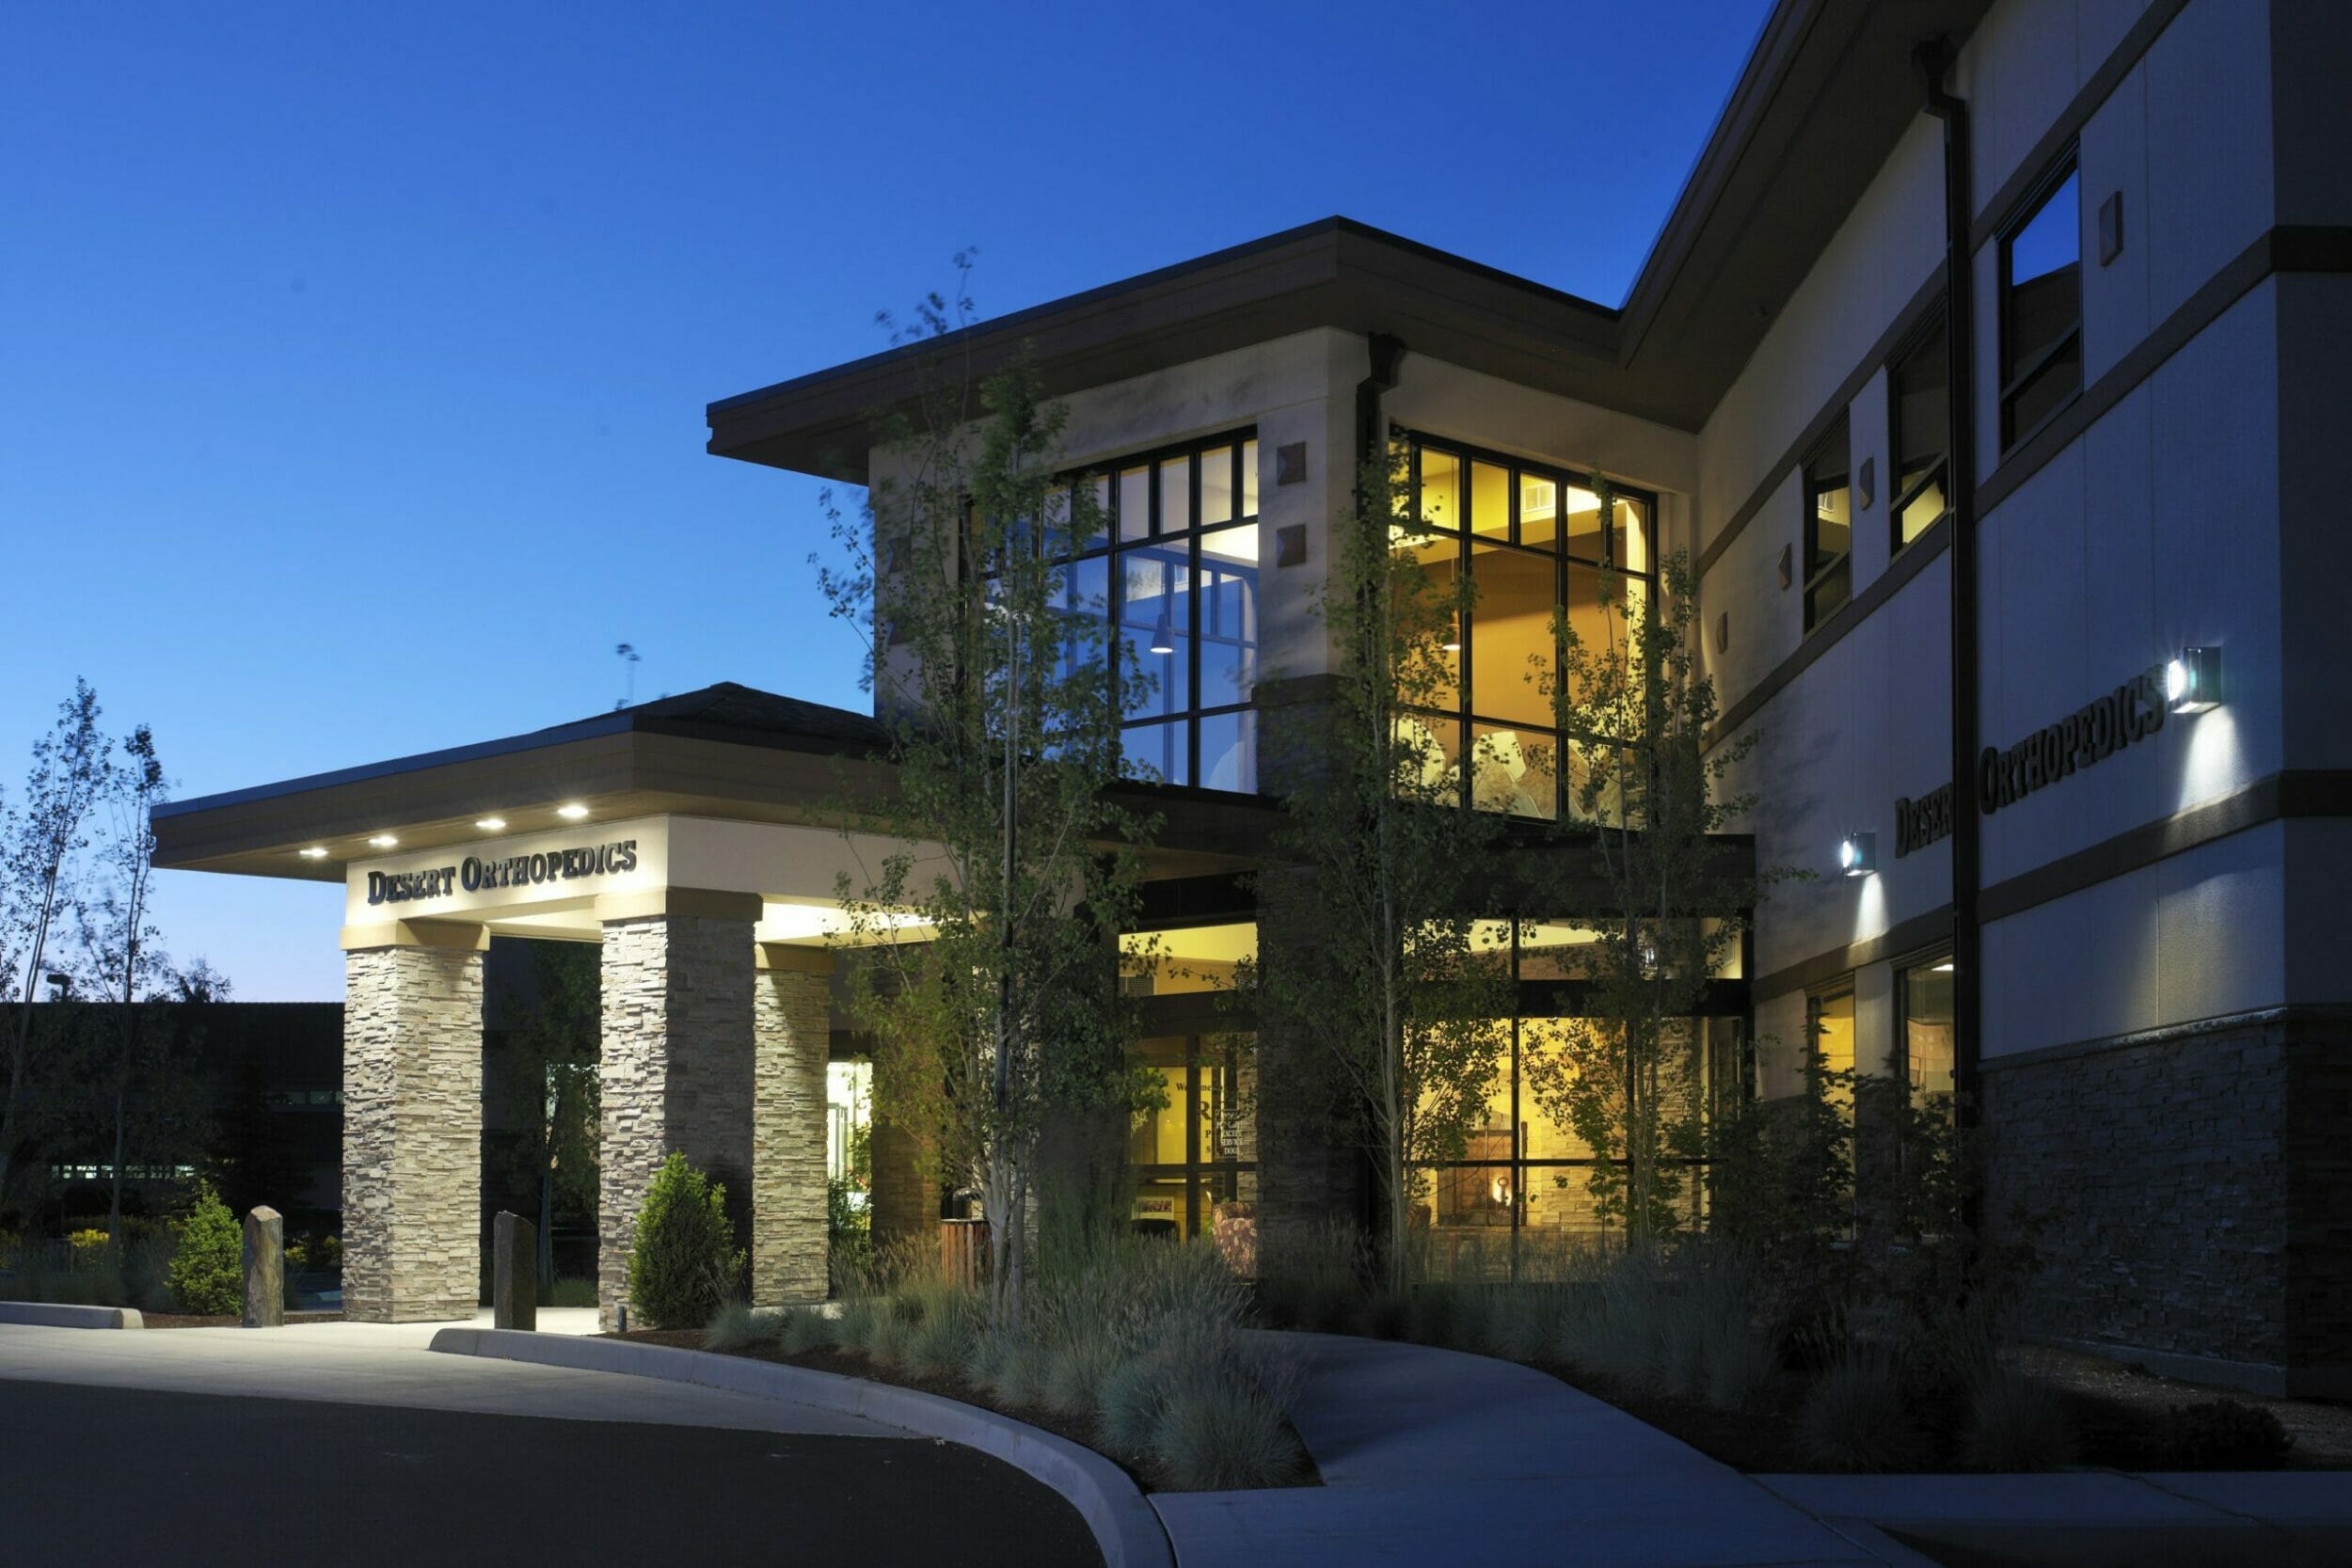 Exterior close-up shot of the entrance to Bend Surgey Center with the Desert Orthopedics sign above the door and glowing lights inside